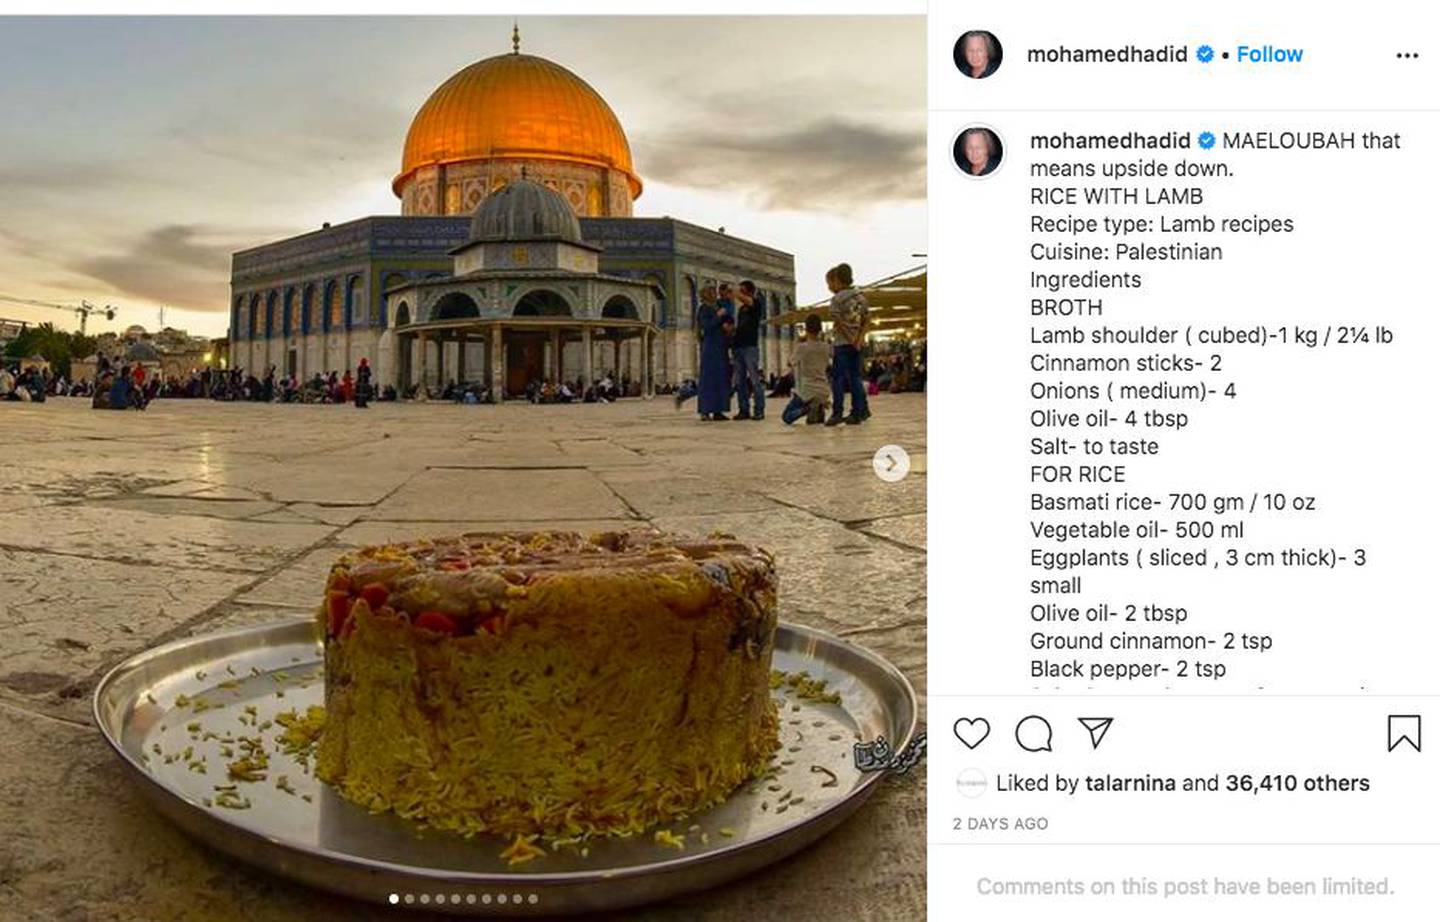 Mohamed Hadid's maeloubah recipe, which he shared on Instagram. Instagram / Mohamed Hadid